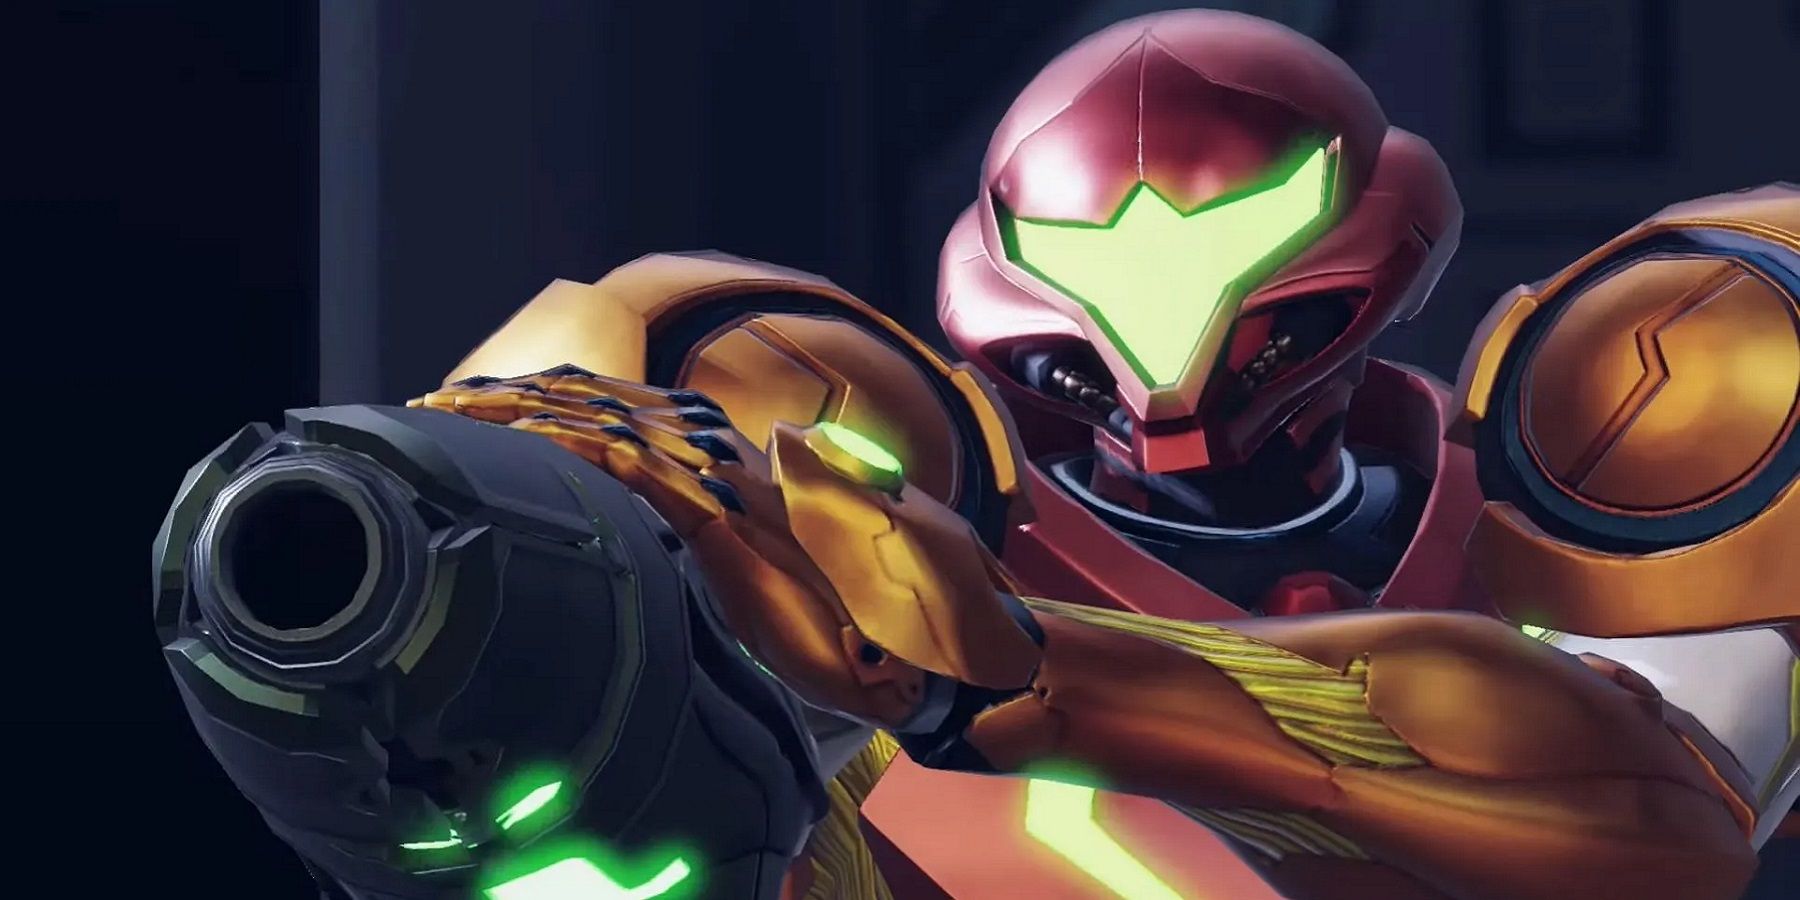 An image from Metroid Dread showing Samus Aran in her orange suit pointing her arm cannon towards the camera.